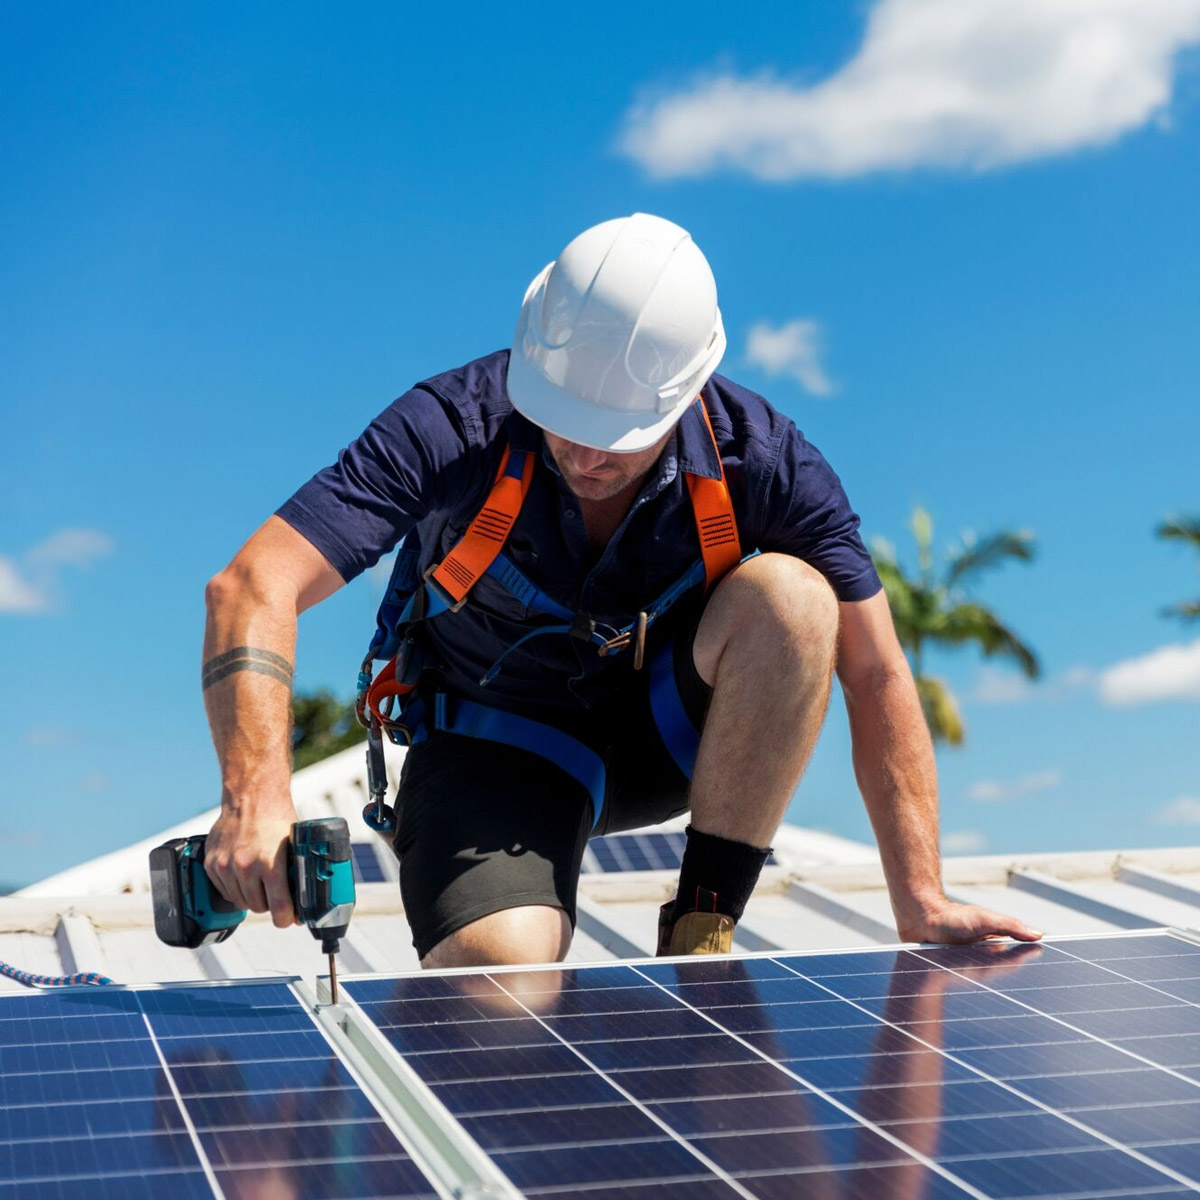 Solar Panel Installers in Shallowater